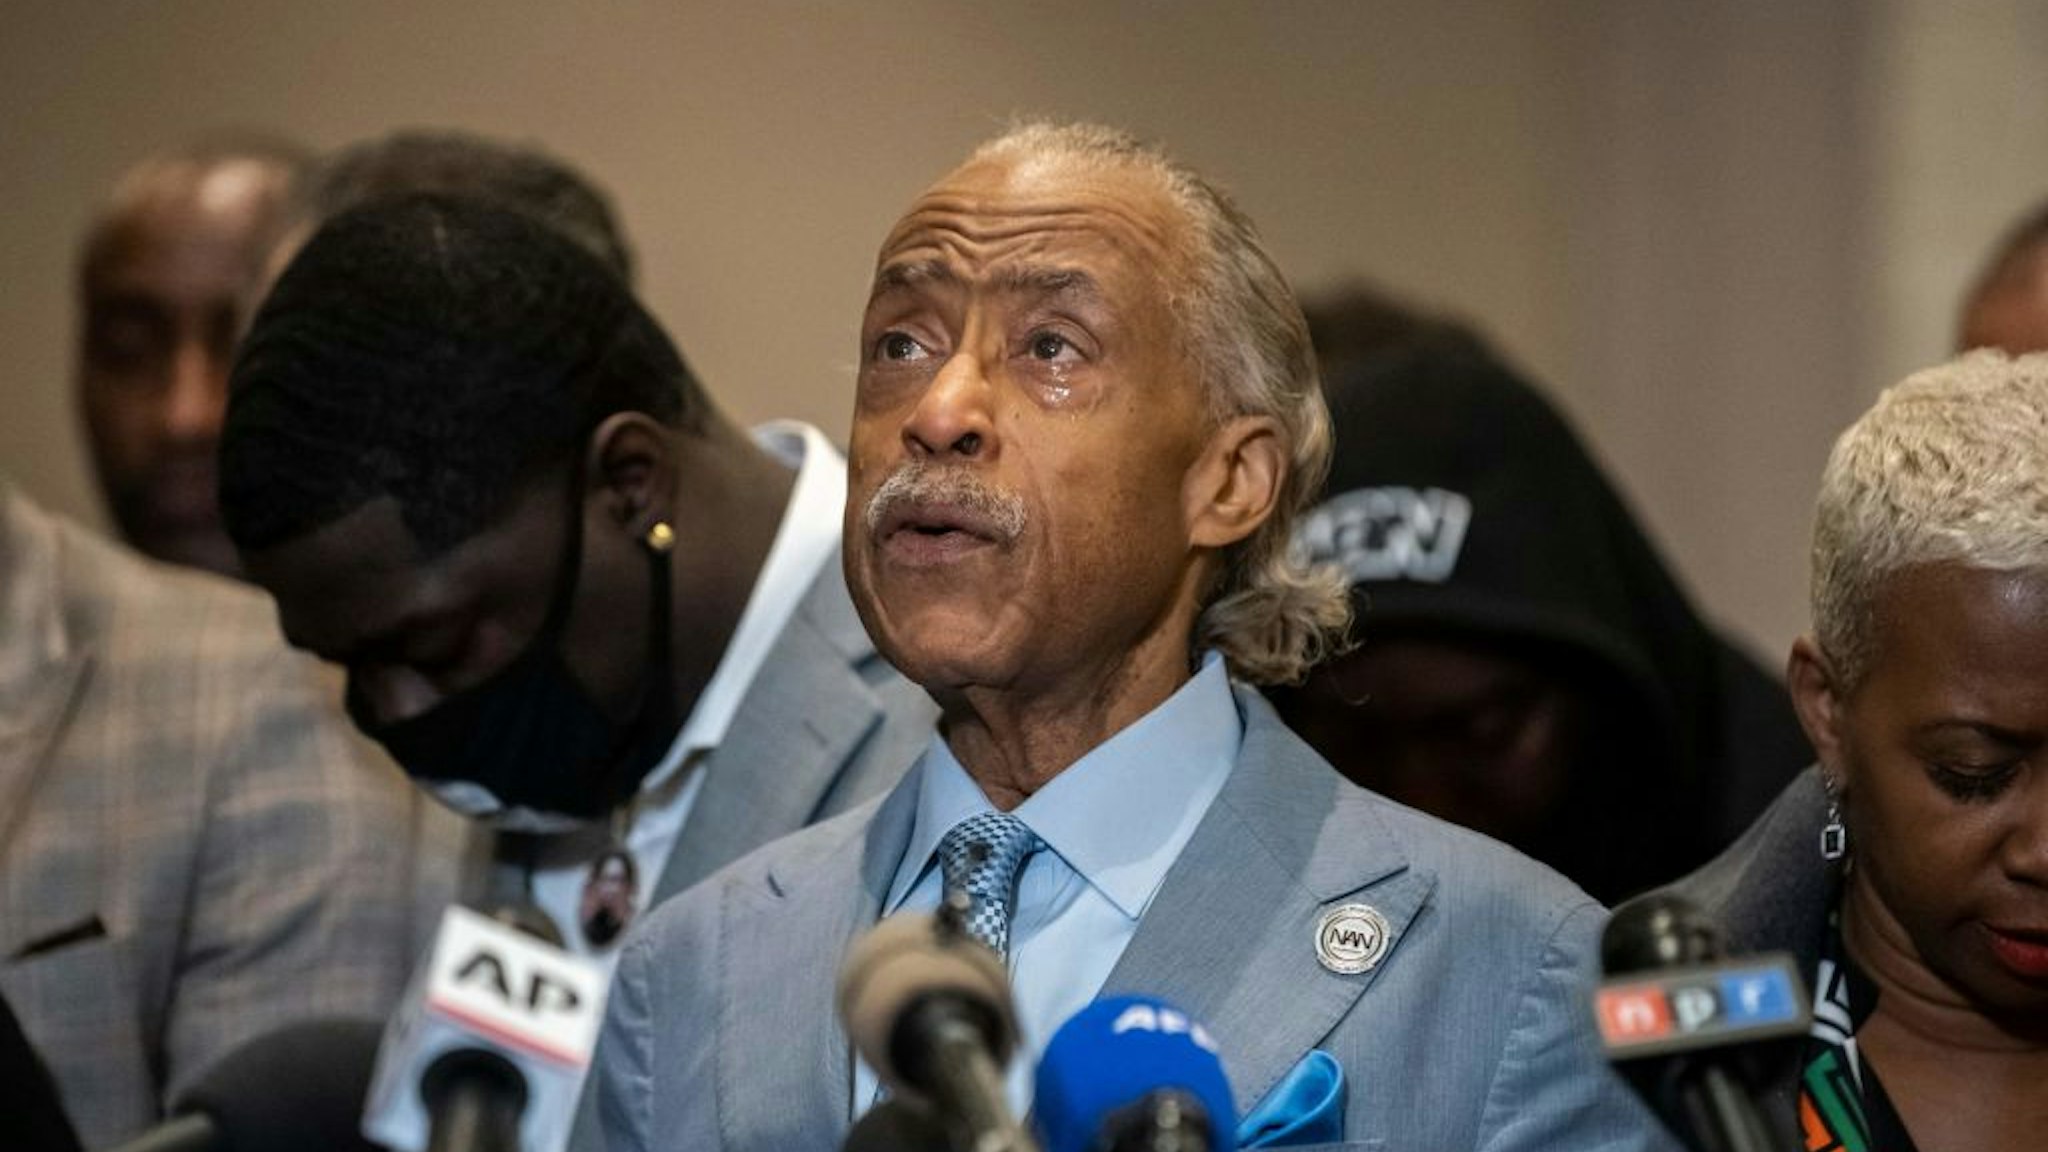 Reverend Al Sharpton cries during a press conference following the verdict in the trial of former police officer Derek Chauvin in Minneapolis, Minnesota on April 20, 2021. - Sacked police officer Derek Chauvin was convicted of murder and manslaughter on april 20 in the death of African-American George Floyd in a case that roiled the United States for almost a year, laying bare deep racial divisions. (Photo by Kerem Yucel / AFP) (Photo by KEREM YUCEL/AFP via Getty Images)